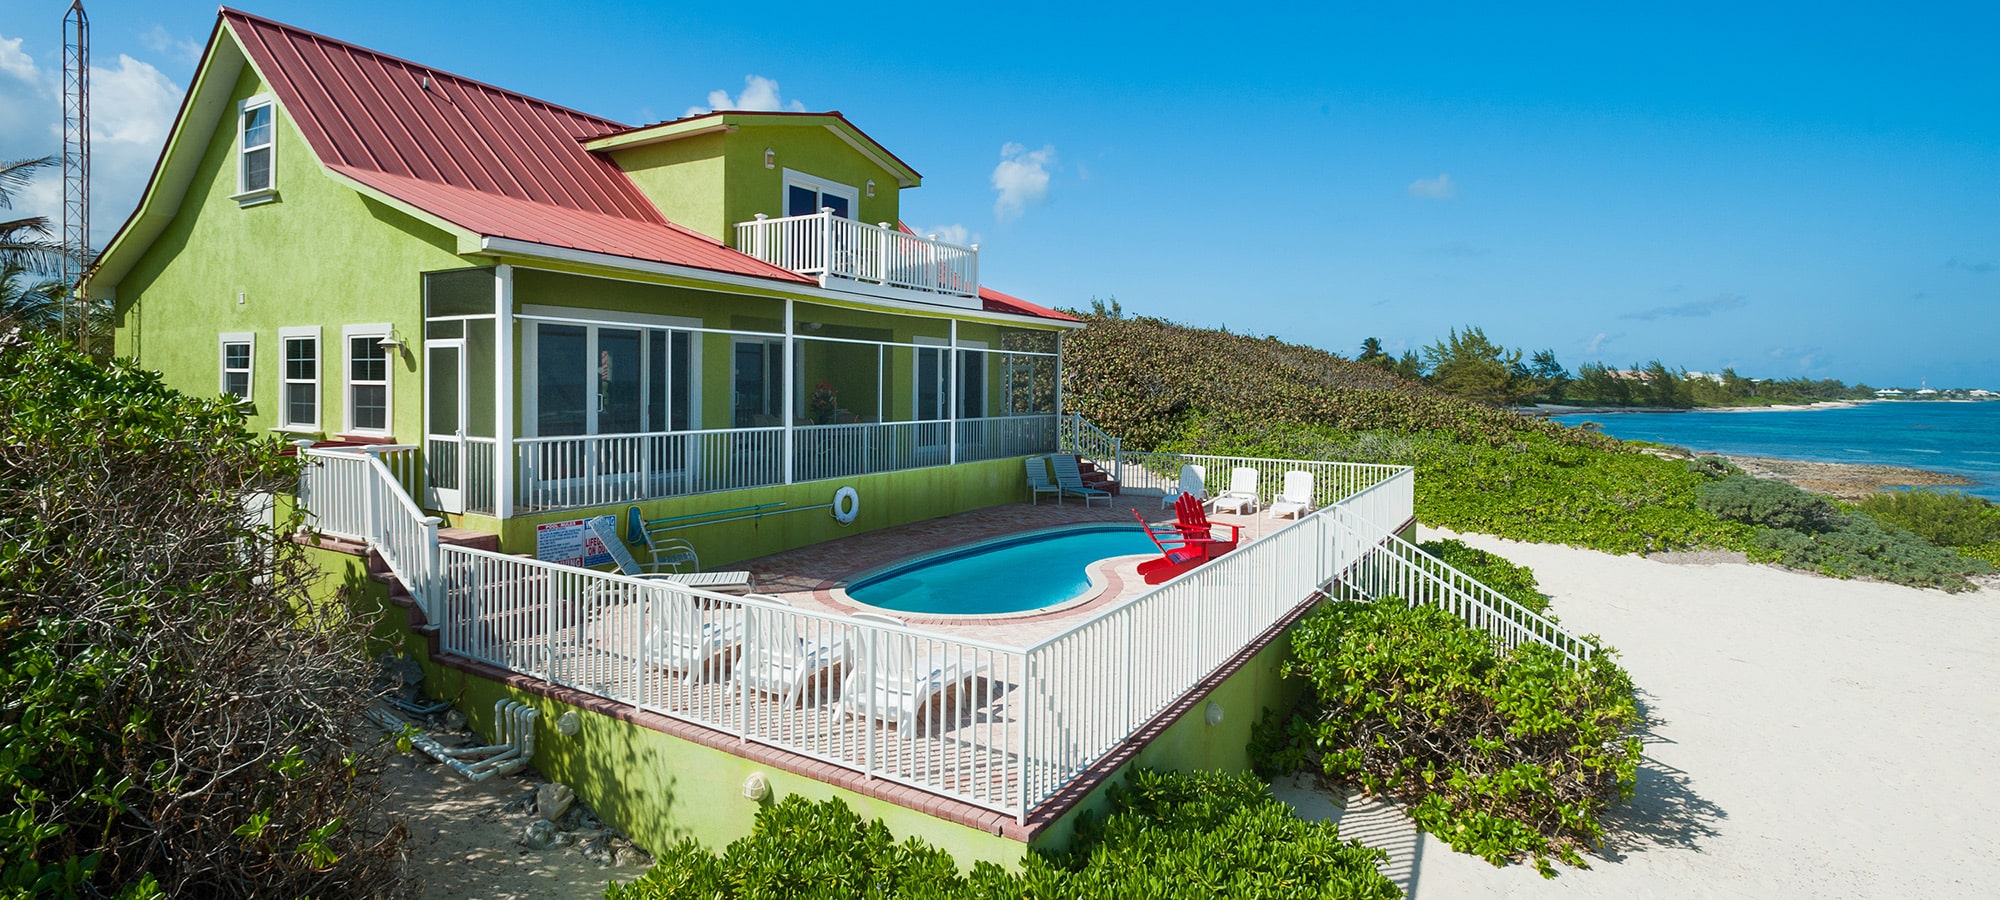 Sleek condos, beachfront houses and more wish-list-worthy digs on Grand Cayman.